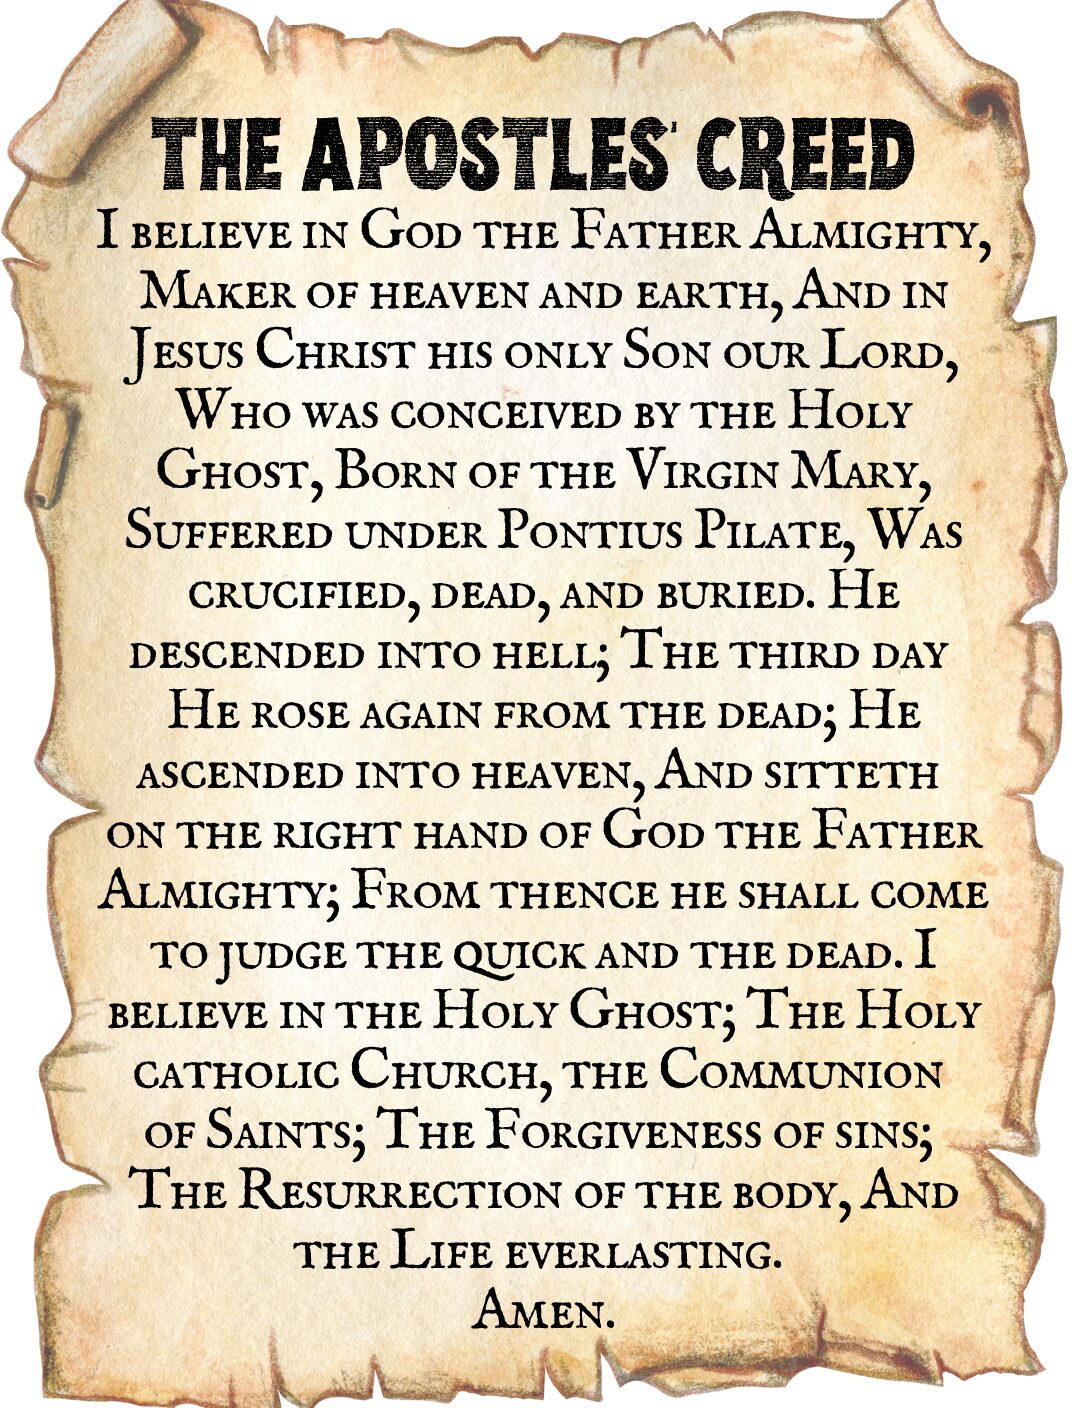 What Are The Three Parts Of The Apostles Creed